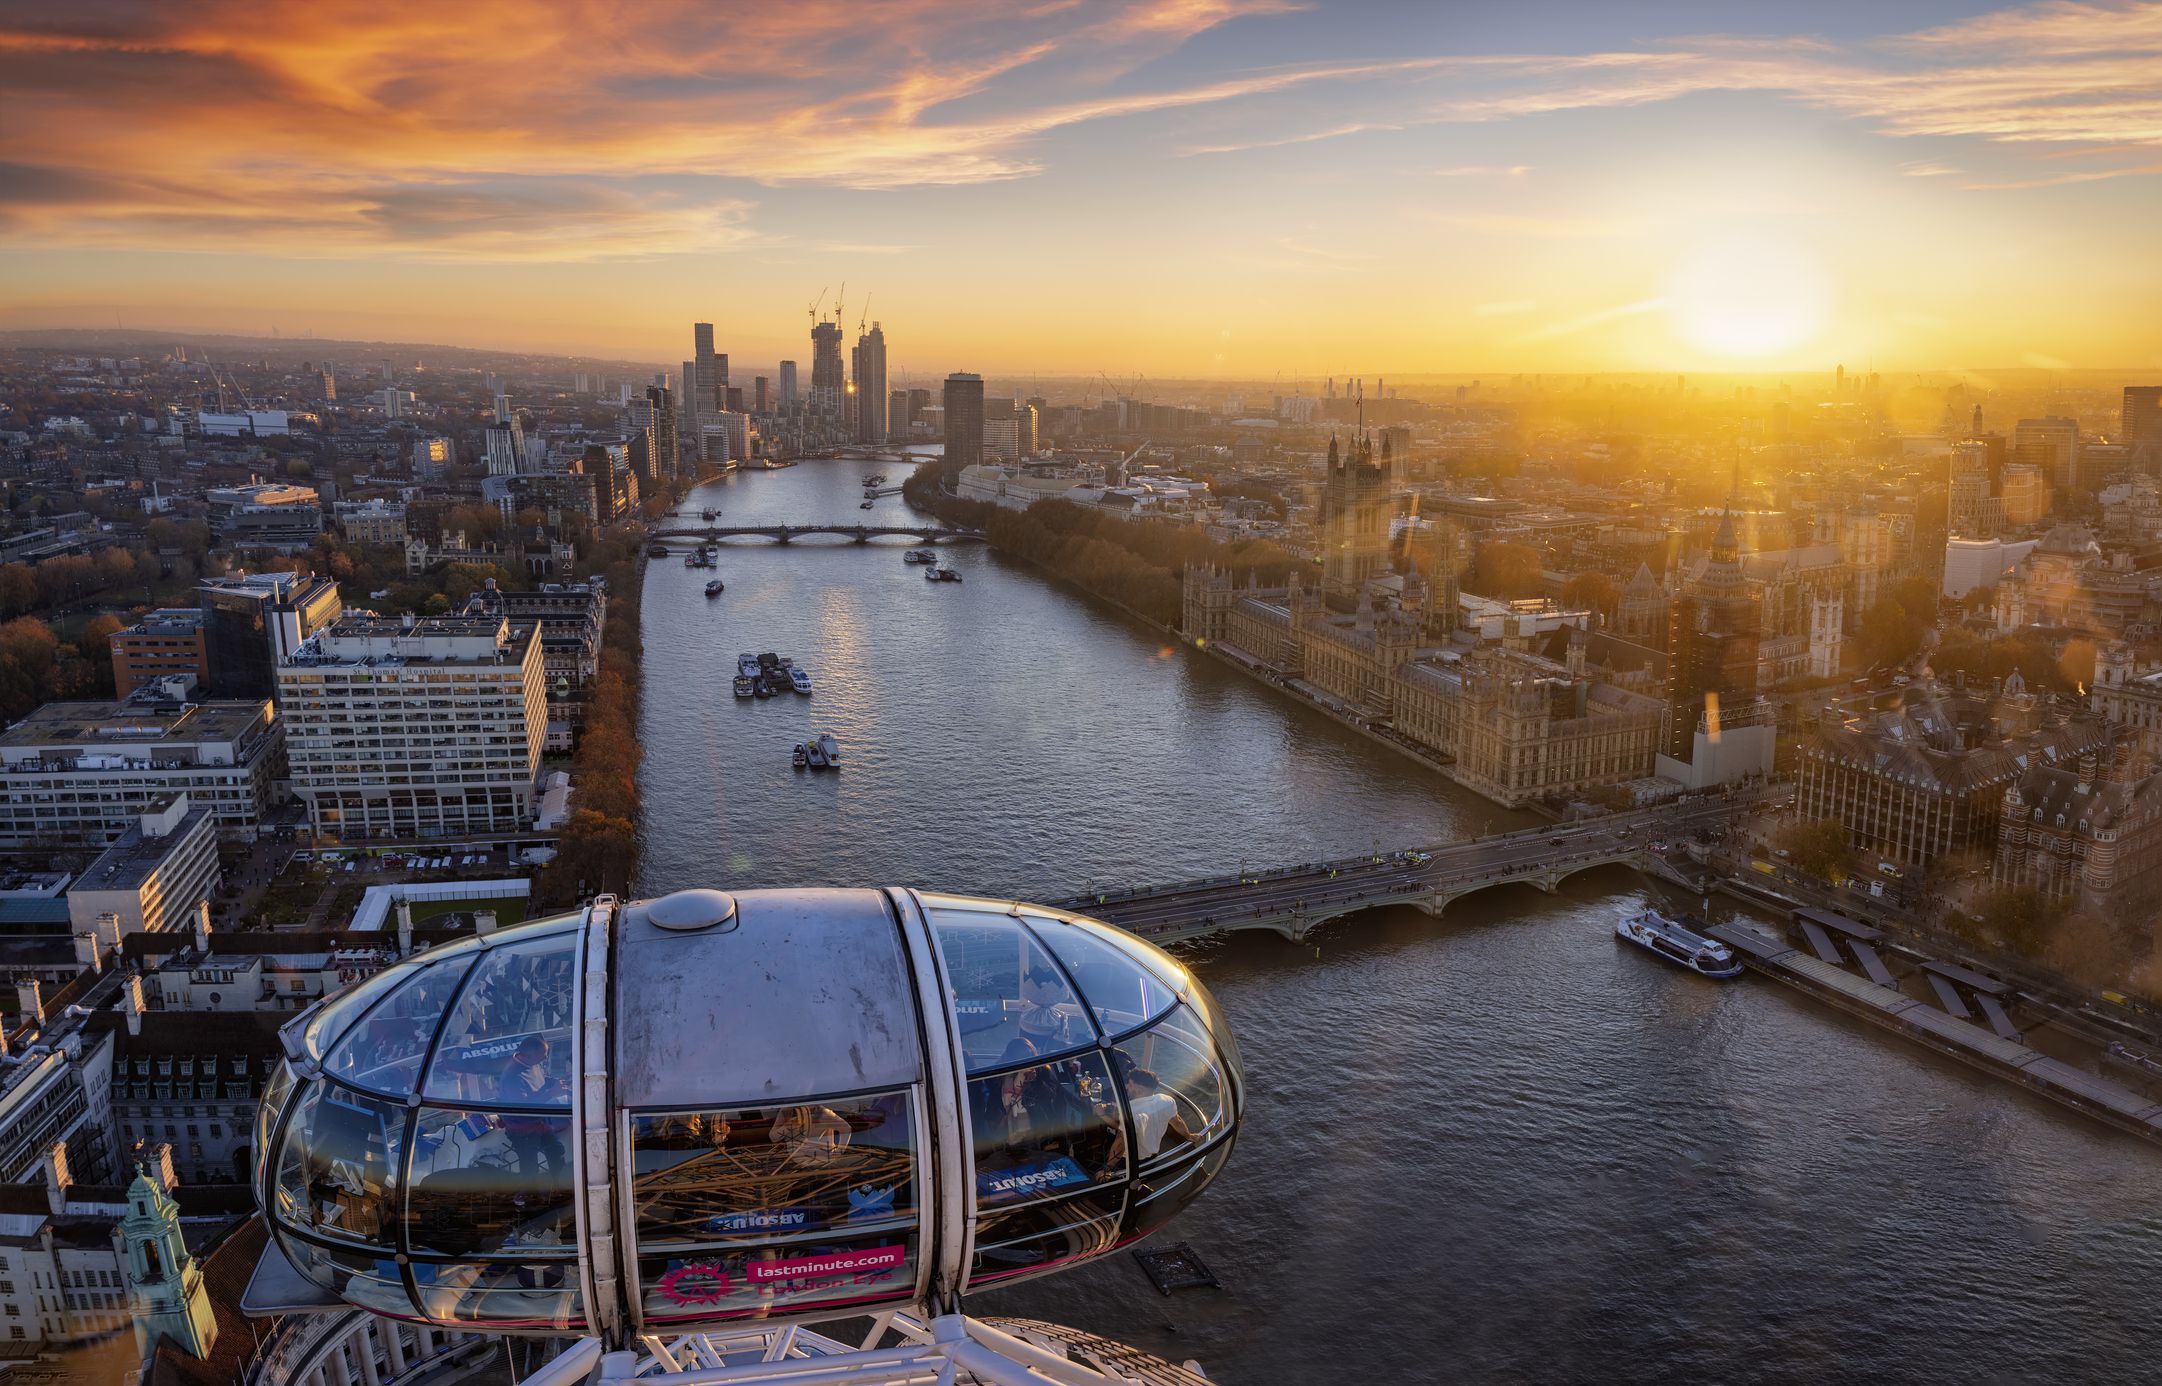 <p><b> Average Star Review: </b>4.535</p><p>As one of London’s most iconic landmarks, The London Eye works for a great place to watch as  the city is bathed in golden light, and landmarks like Big Ben and the River Thames glow beautifully. A ride on the giant ferris wheel at this time is breathtaking, making it a must-do for visitors seeking an unforgettable view of London’s sunset.</p>